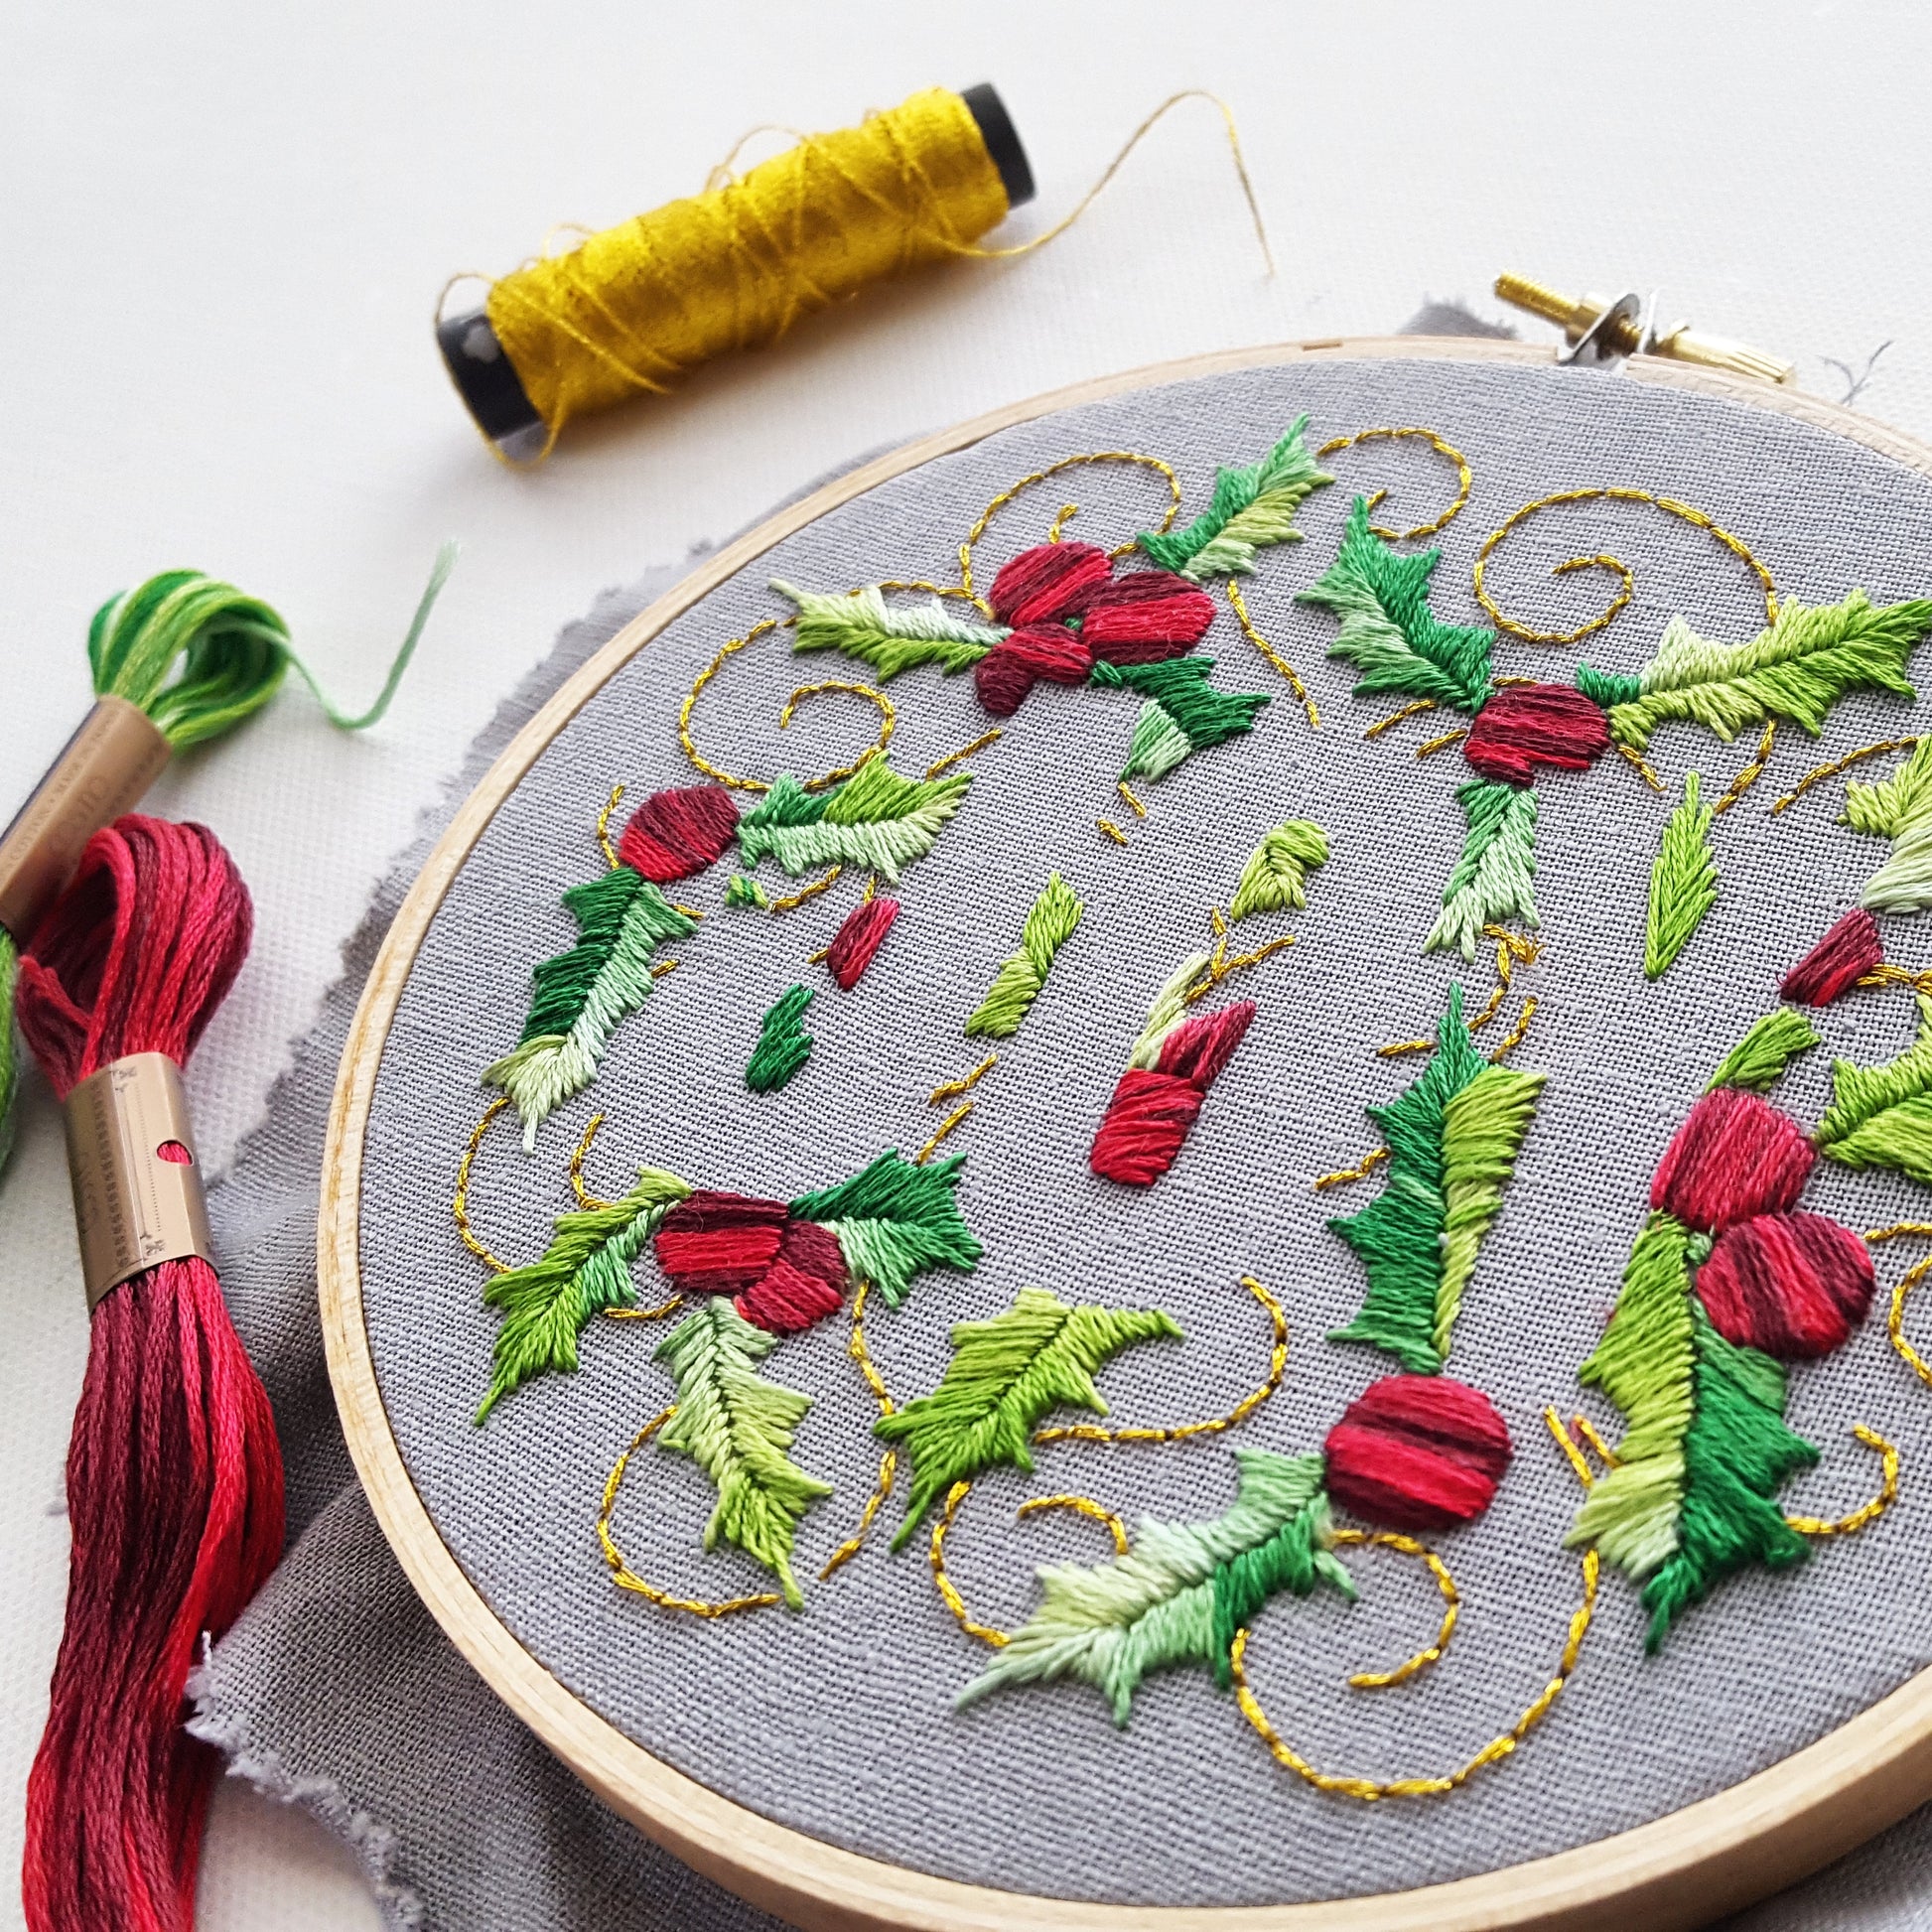 Open Book Hand Embroidery PDF Downloadable Pattern Tutorial